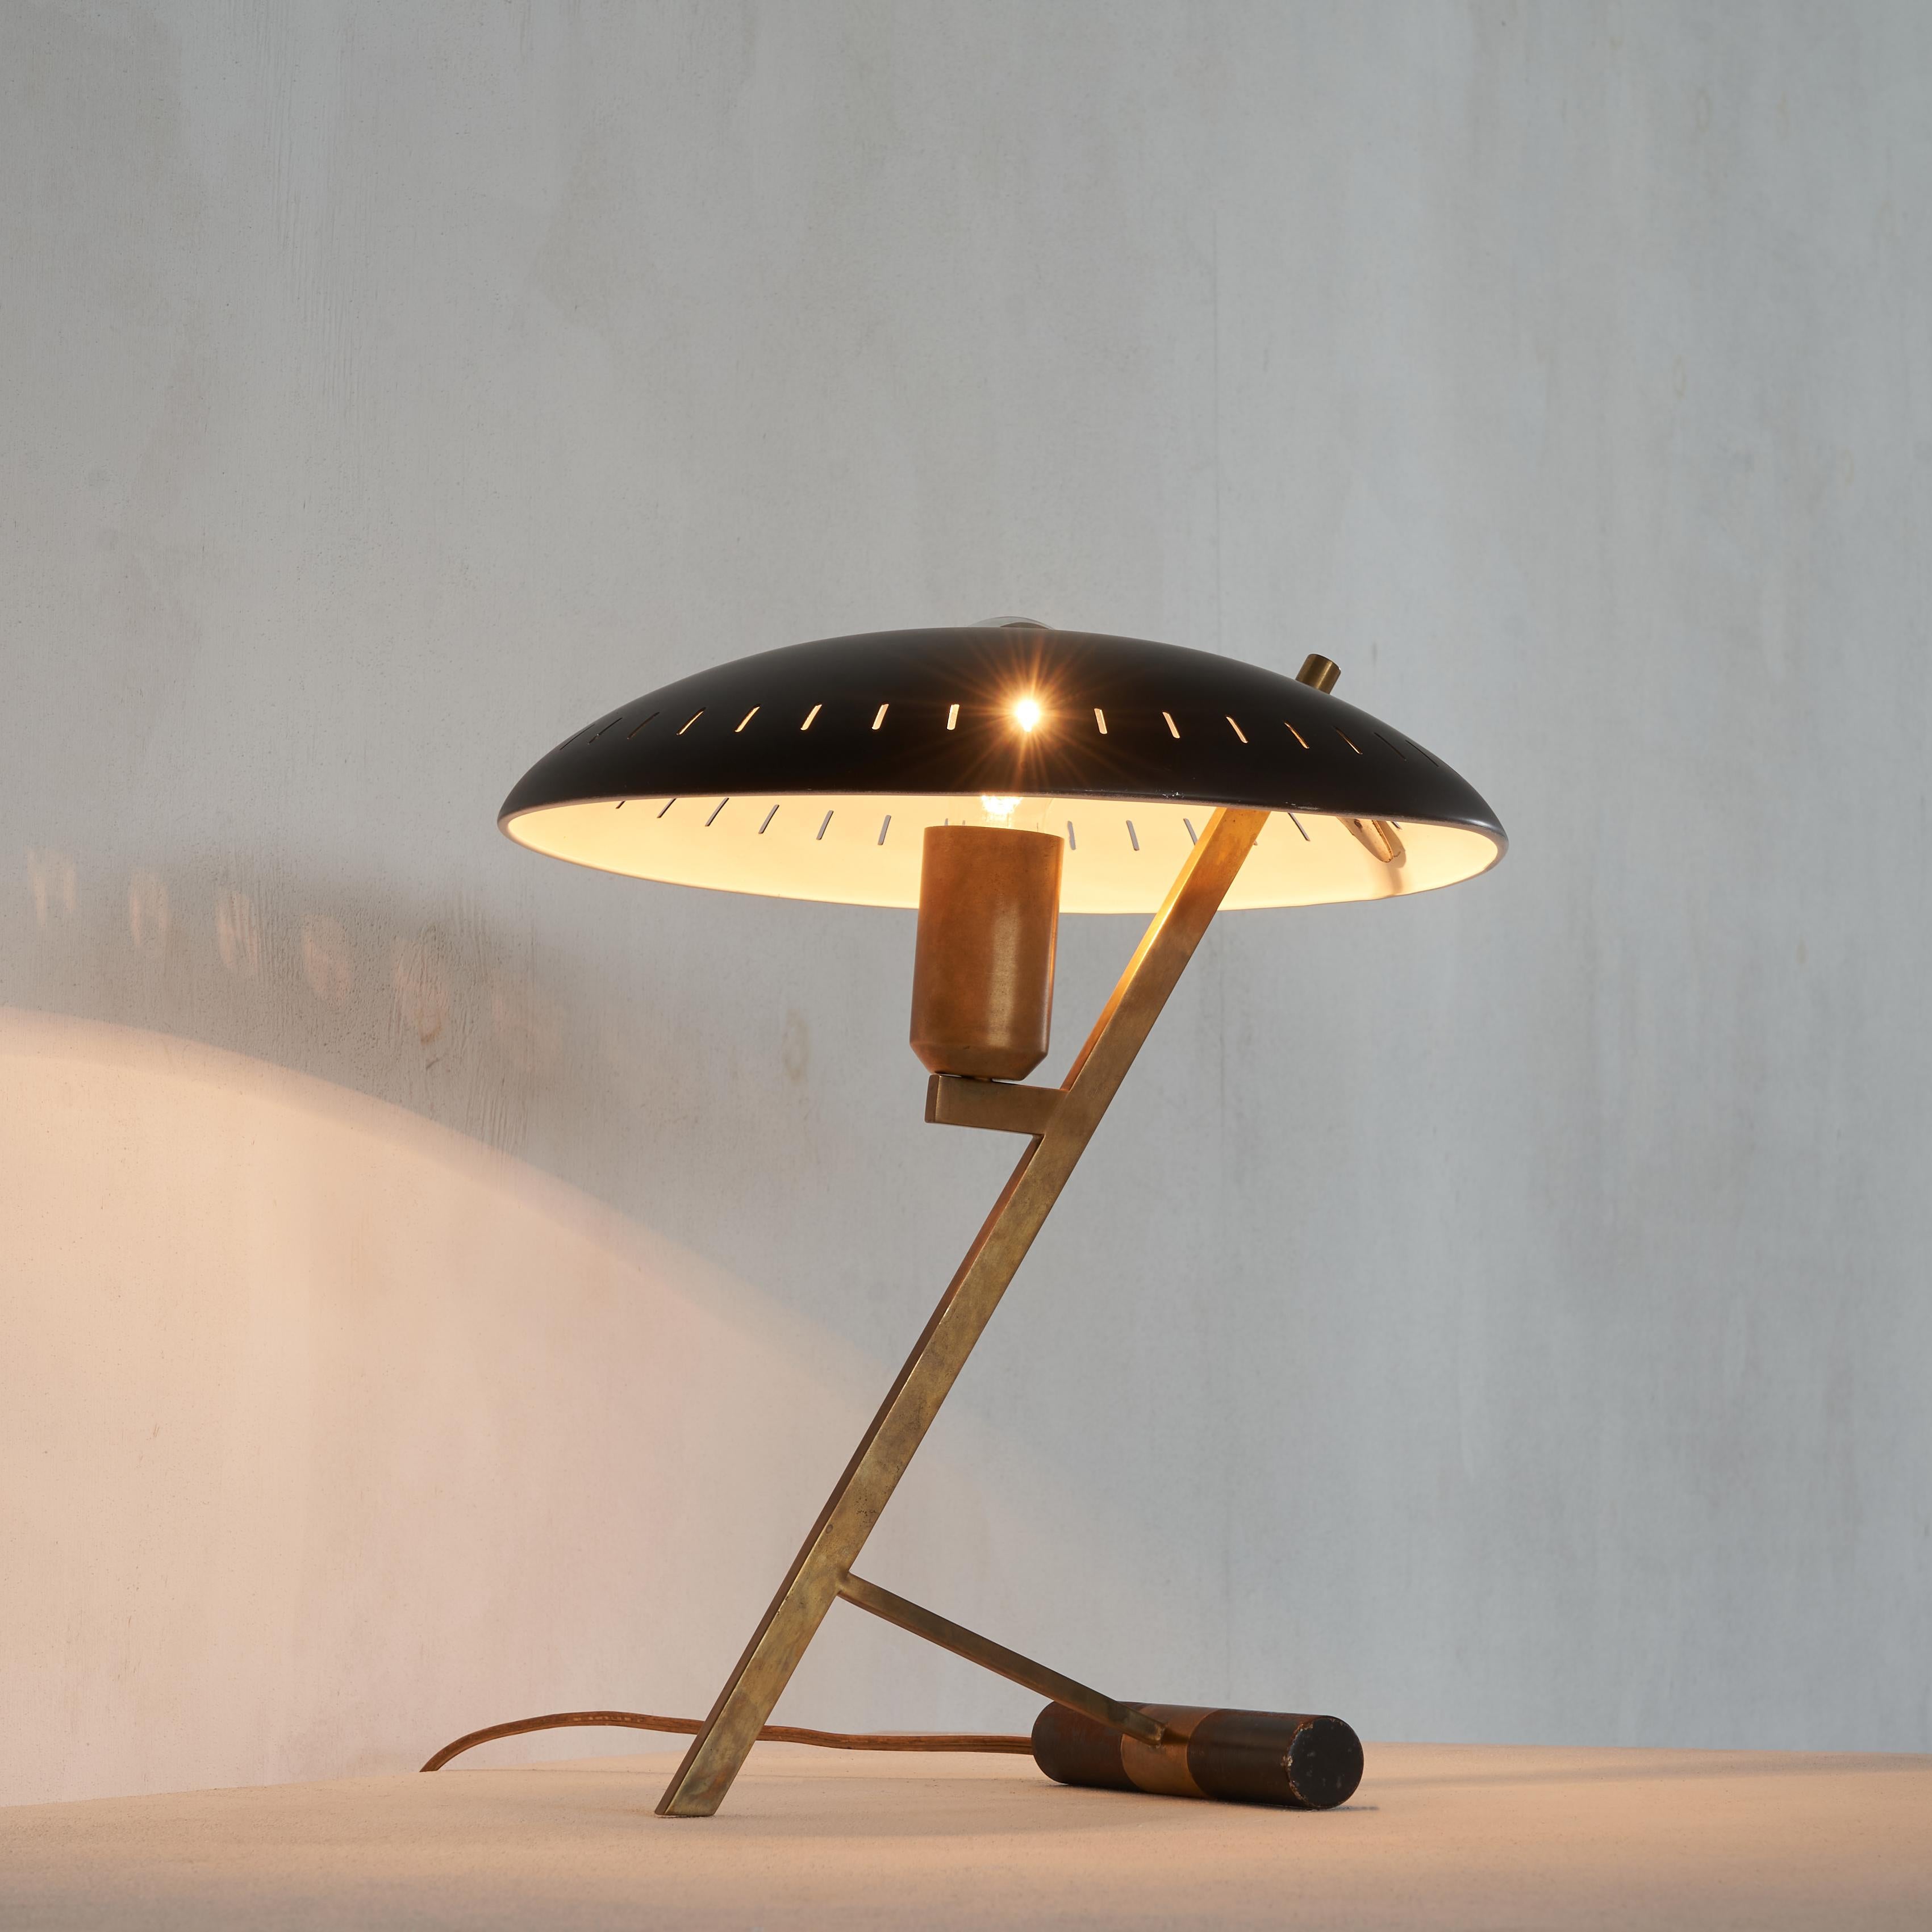 Beautifully patinated iconic Z lamp by Louis Kalff for Philips. This model is officially called the L 588 FD, but is known as the Z lamp because of it’s Z shaped frame. Our Z shows a really great patina on both the brass frame and the shade. In our